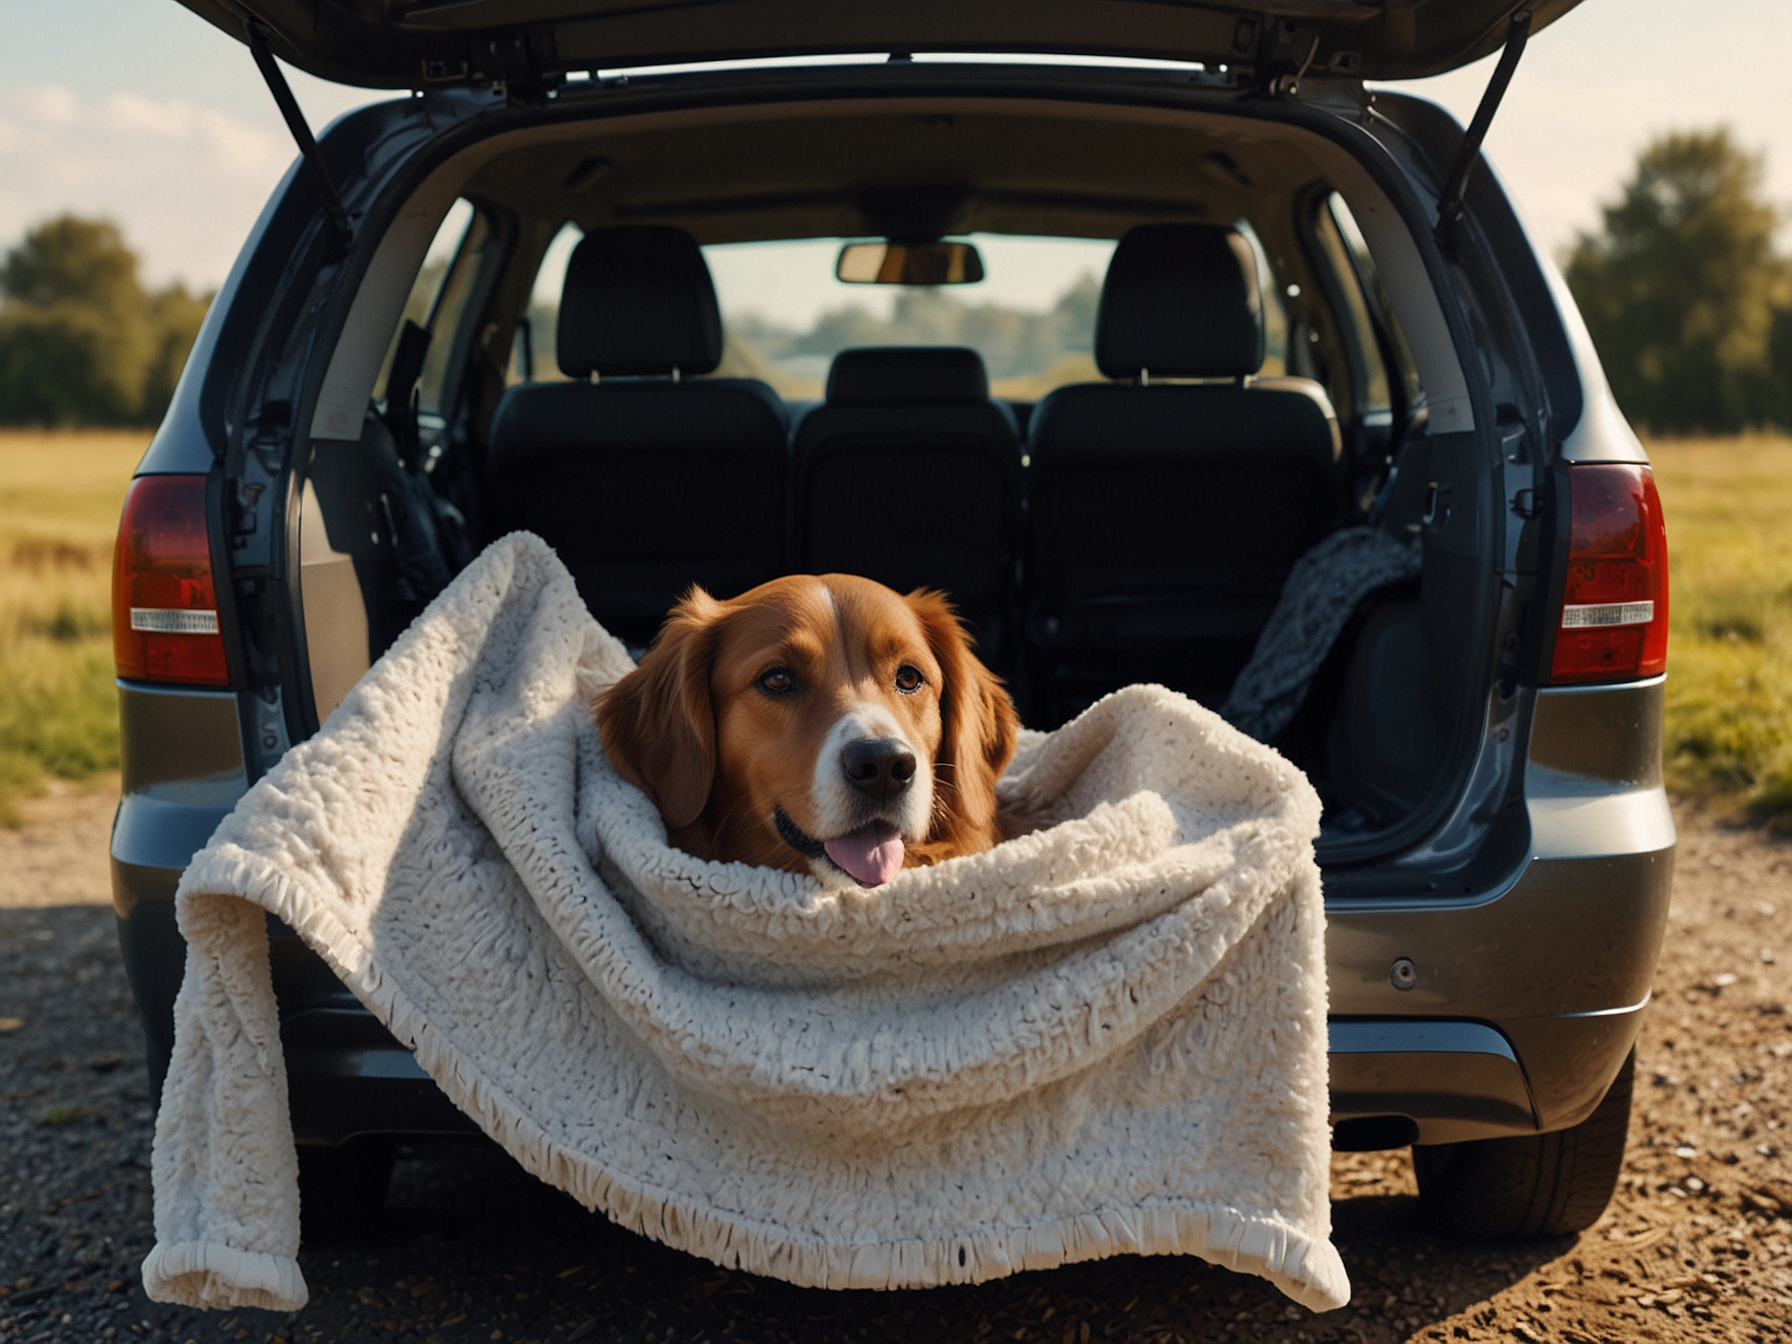 A spacious car boot with a securely fastened crate, lined with comfortable blankets, showcasing how to create a safe and pleasant environment for a dog's journey.